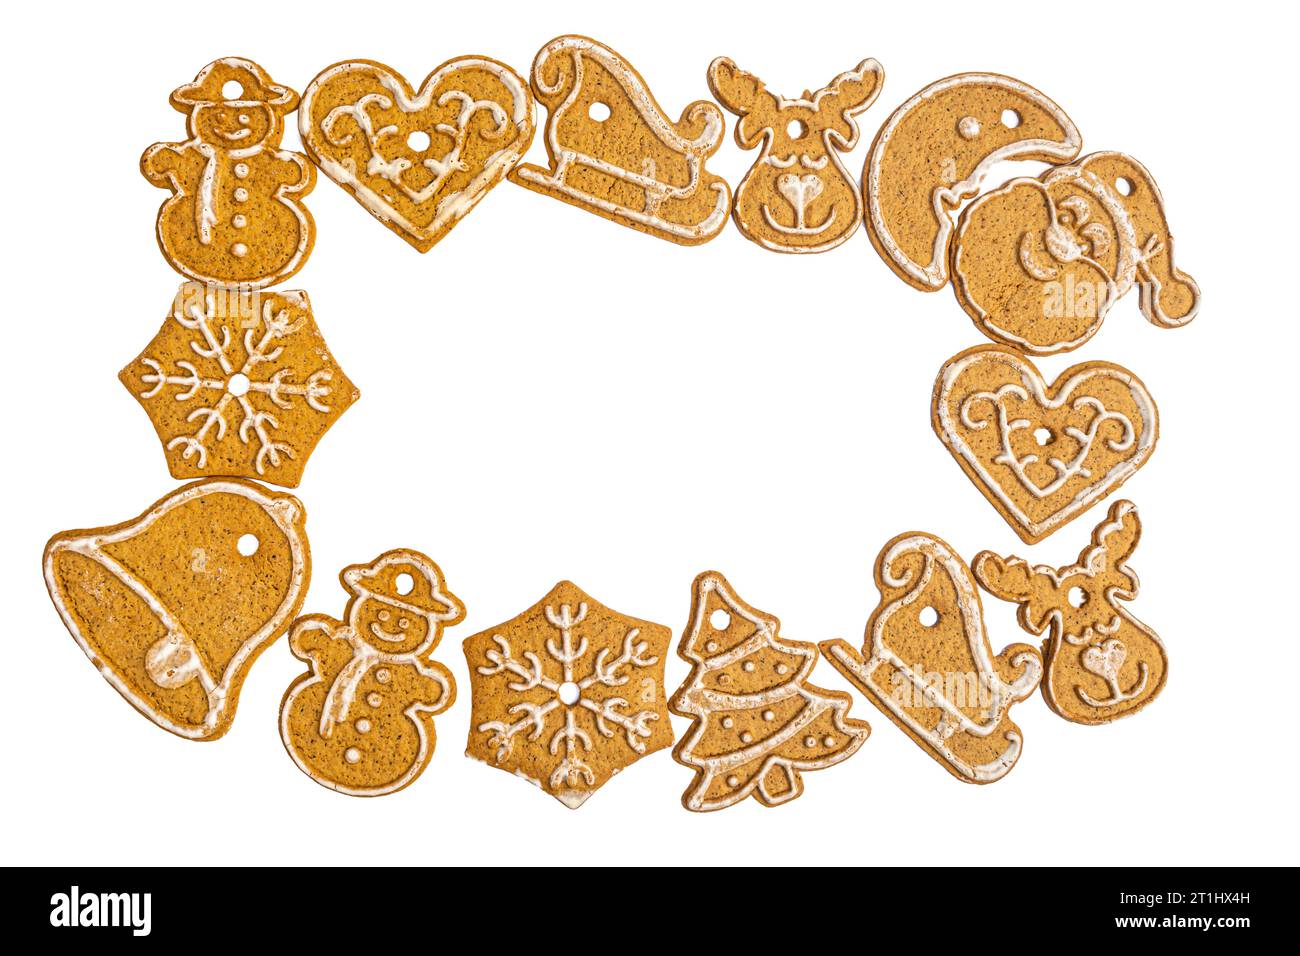 gingerbread cookie, winter figures close up Stock Photo